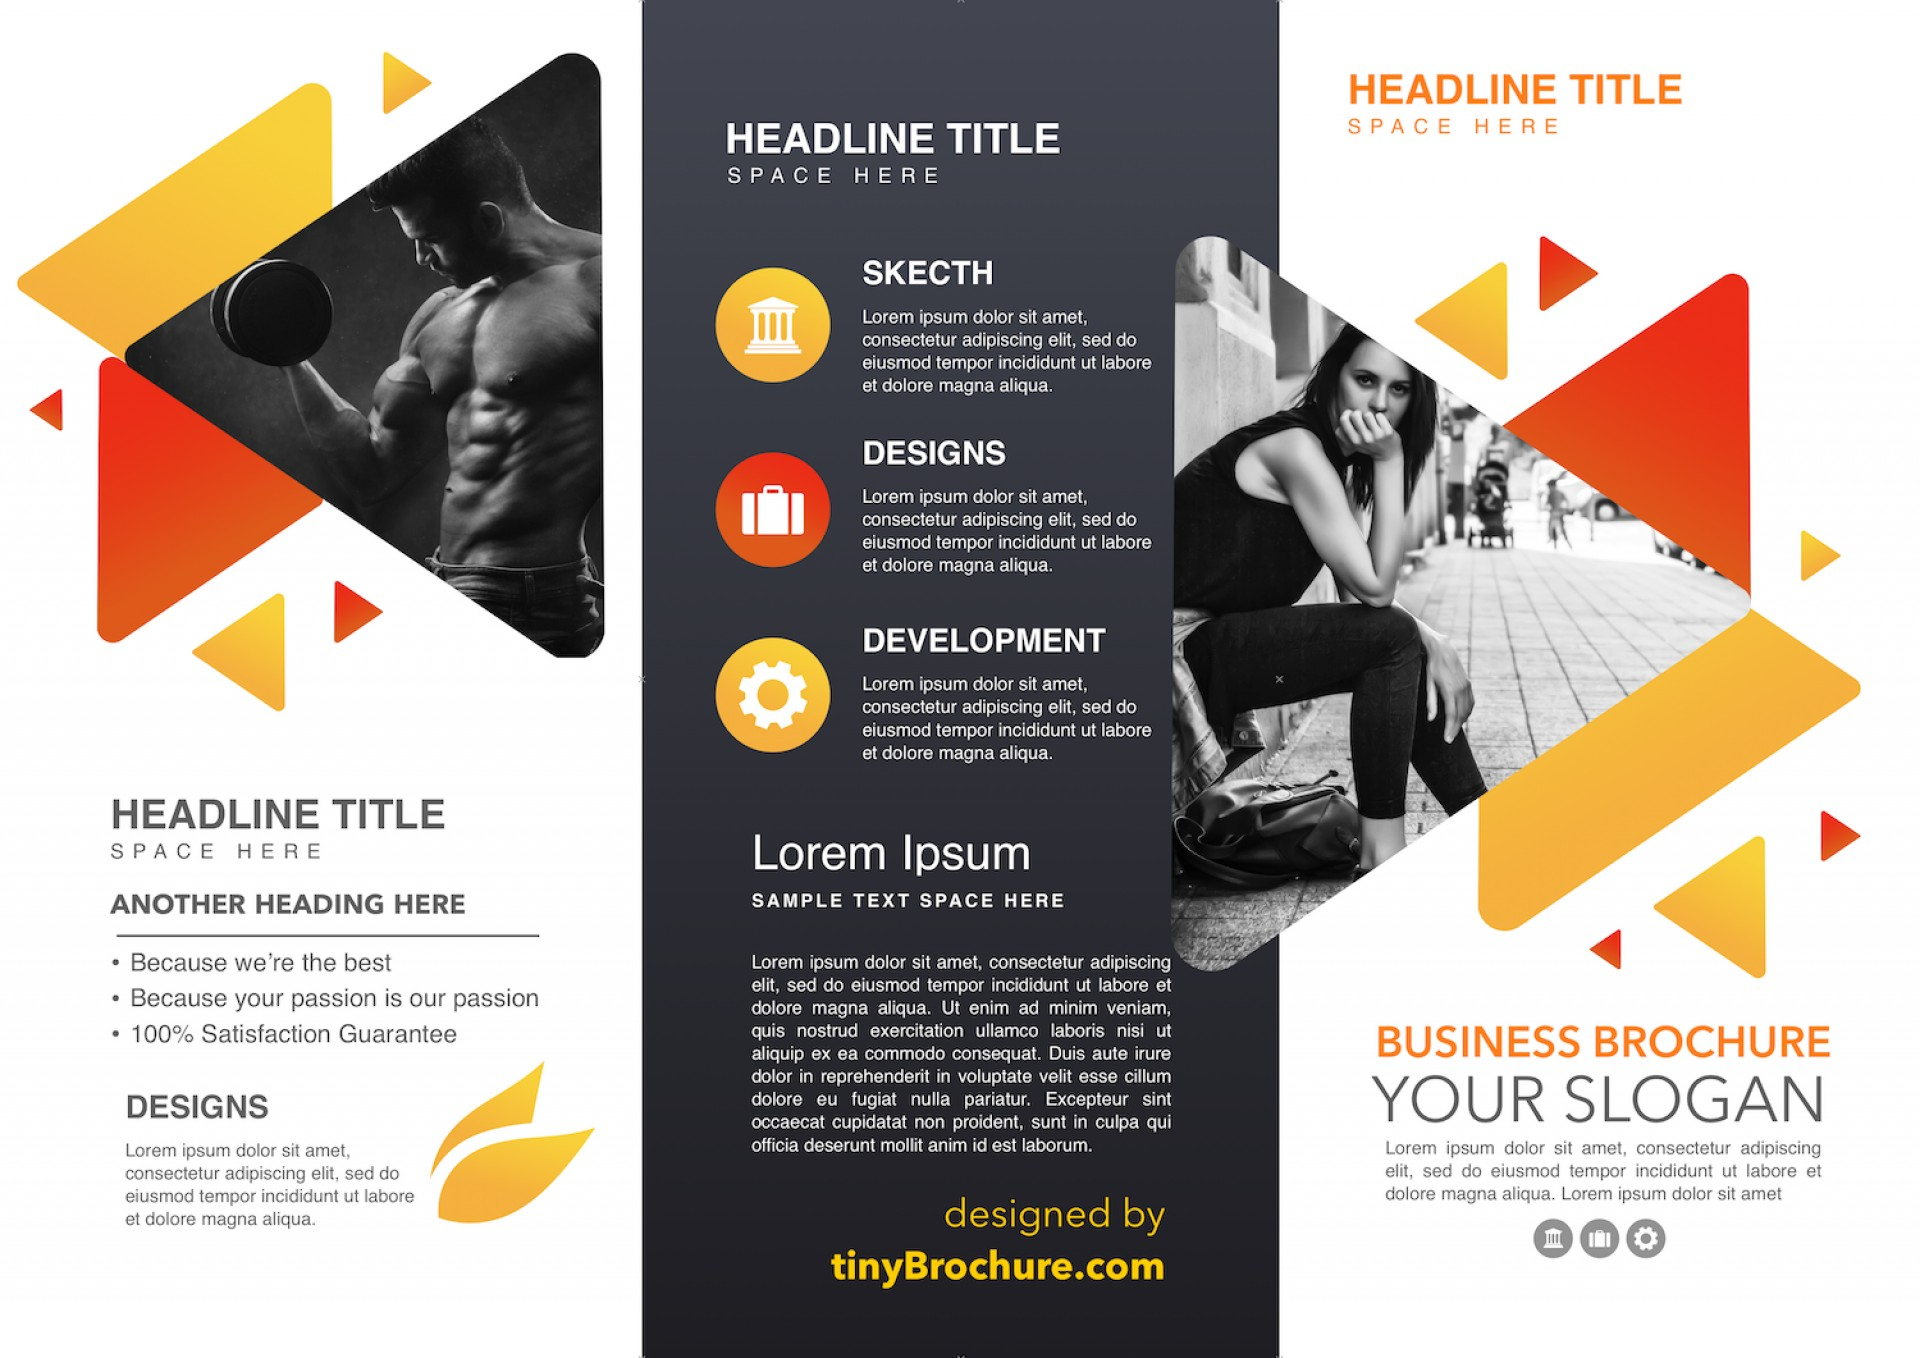 010 Google Docs Science Brochure Template For Luxury Tri With Science Brochure Template Google Docs